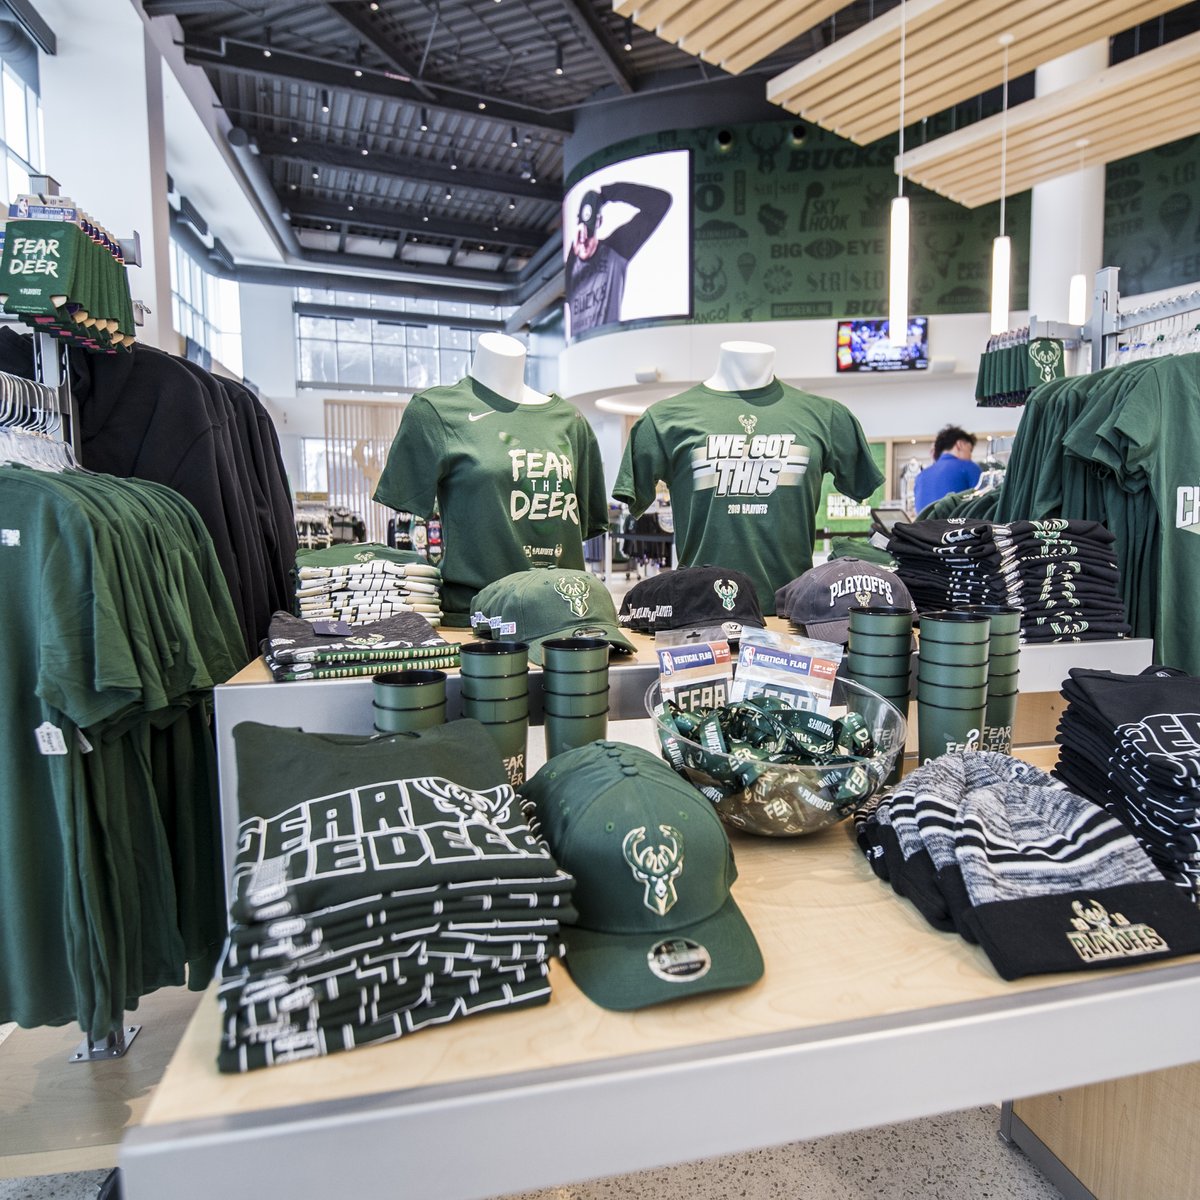 Bucks unveil new fan gear before Sunday's NBA playoff game